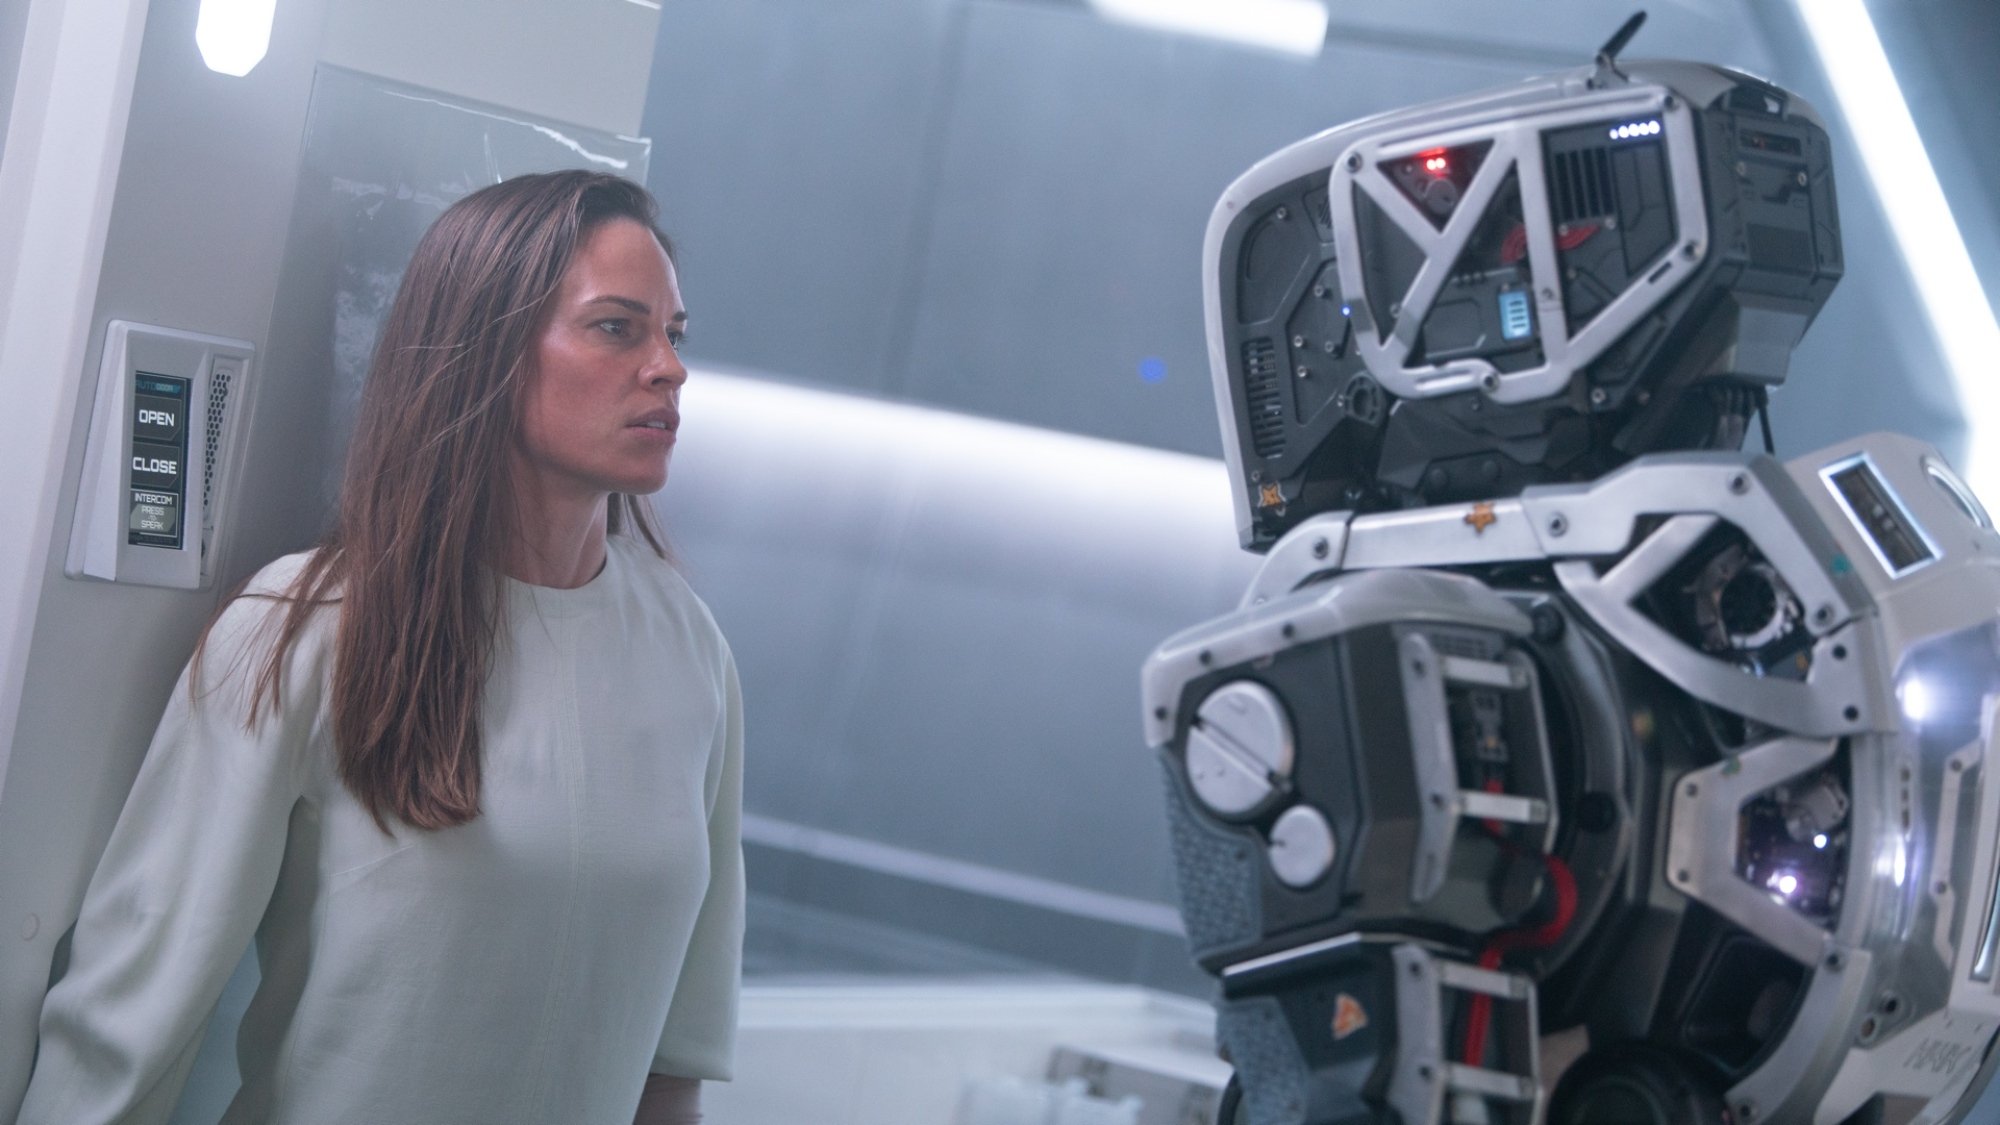 A woman faces off against a tall robot.